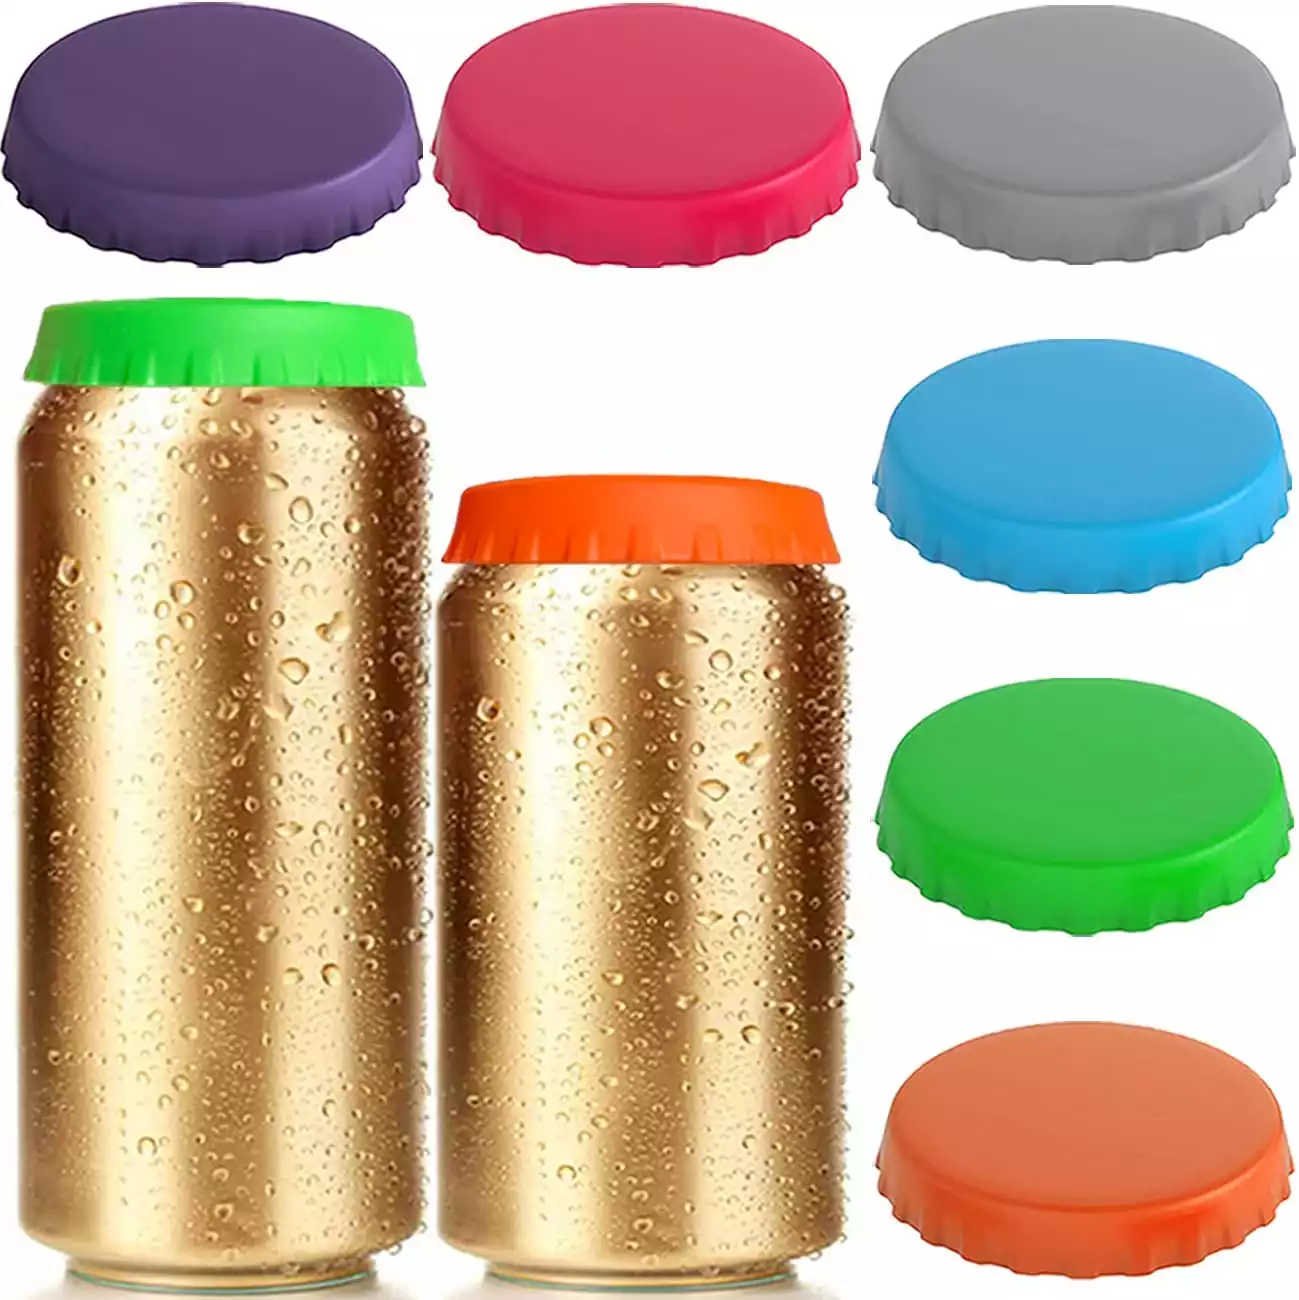 Silicone Soda Can Lids (6-pack)